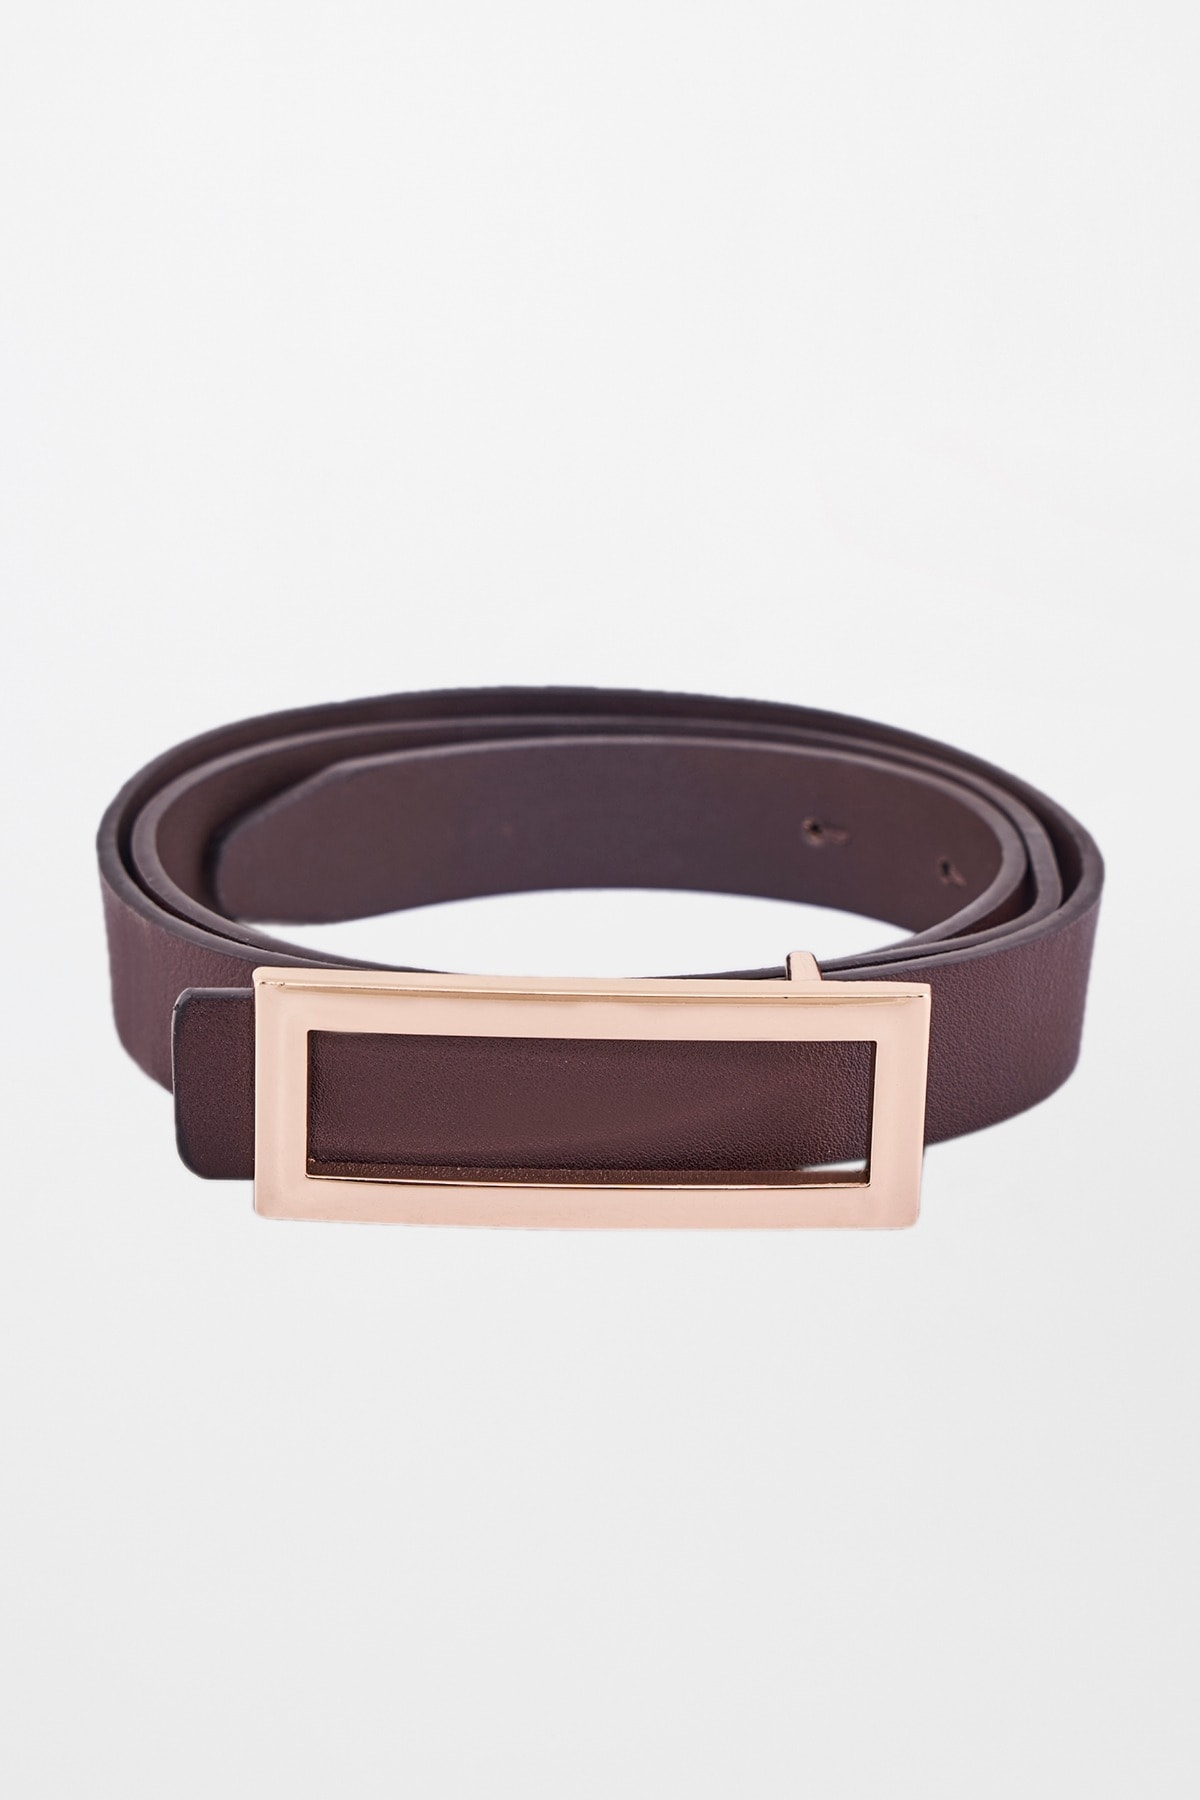 AND | Brown Belt 1